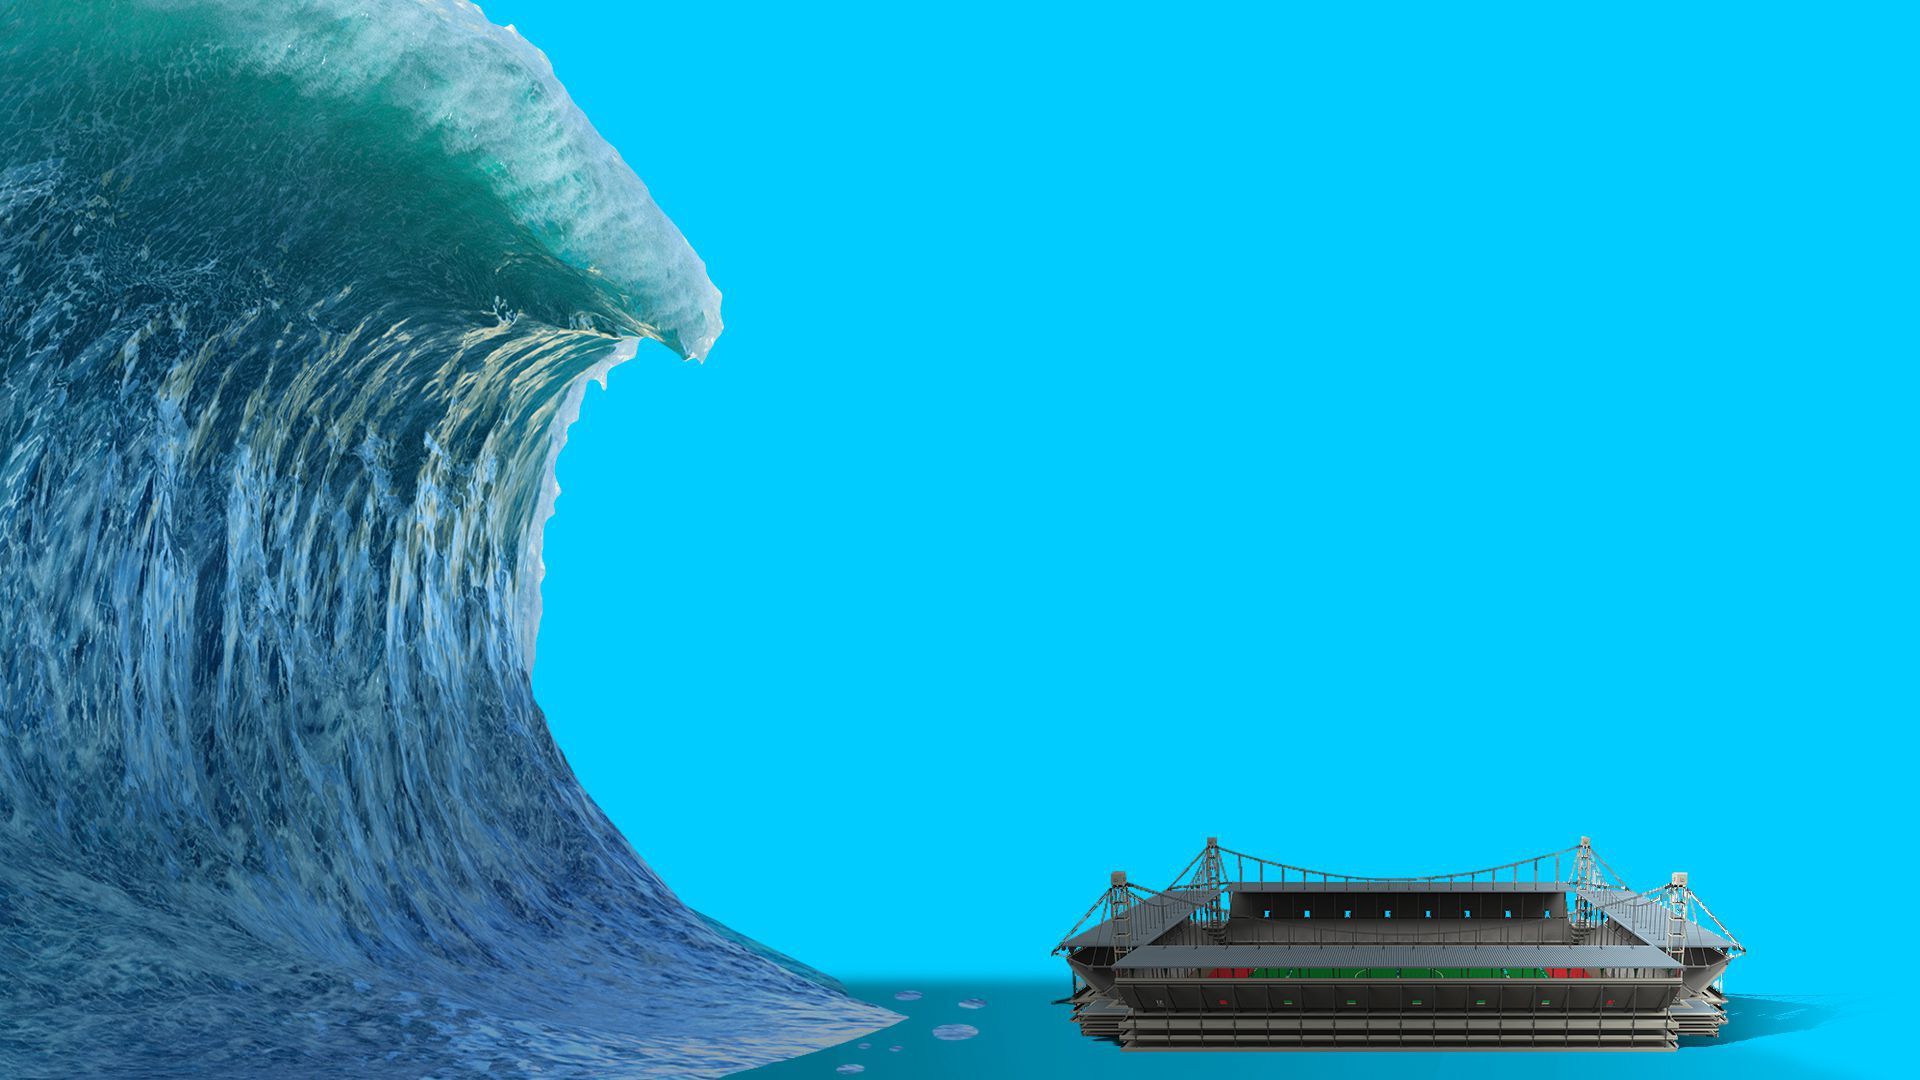 Illustration of a wave looming over a stadium